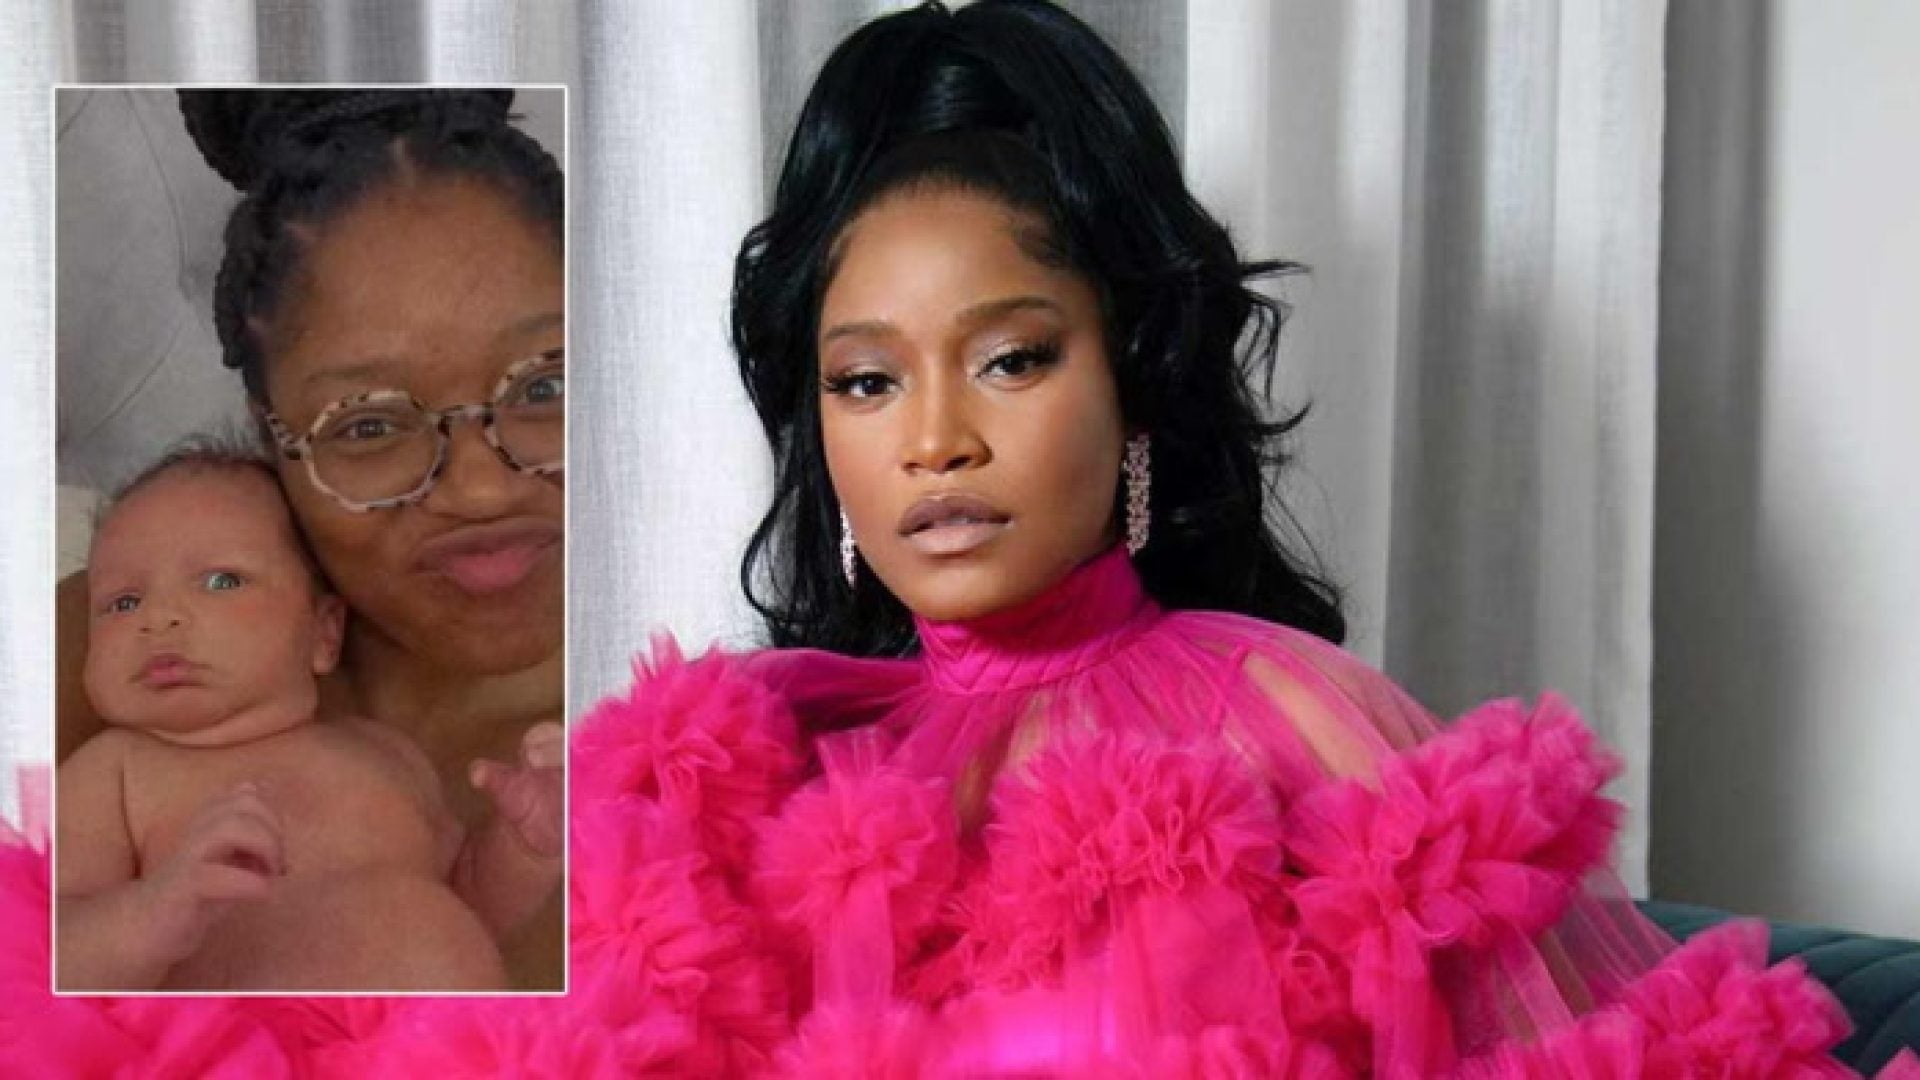 WATCH: Here’s How Keke Palmer, Sheree Whitfield and Keisha Knight Pulliam Spent Their Mother’s Day!